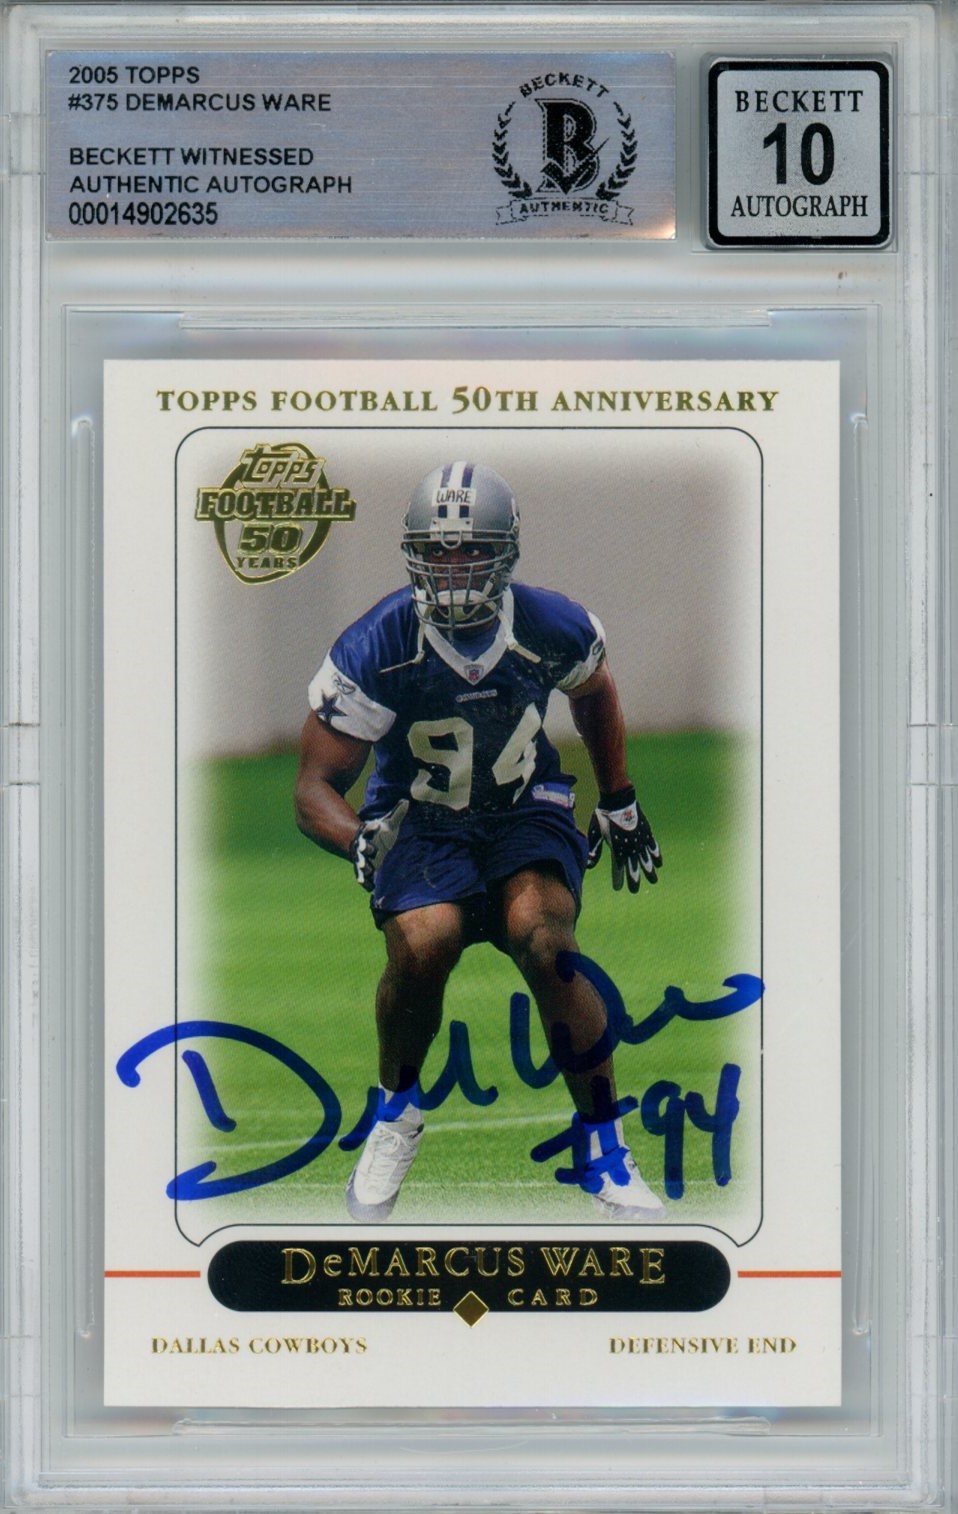 Demarcus Ware Signed Cowboys 2005 Topps #375 Beckett Auto 10